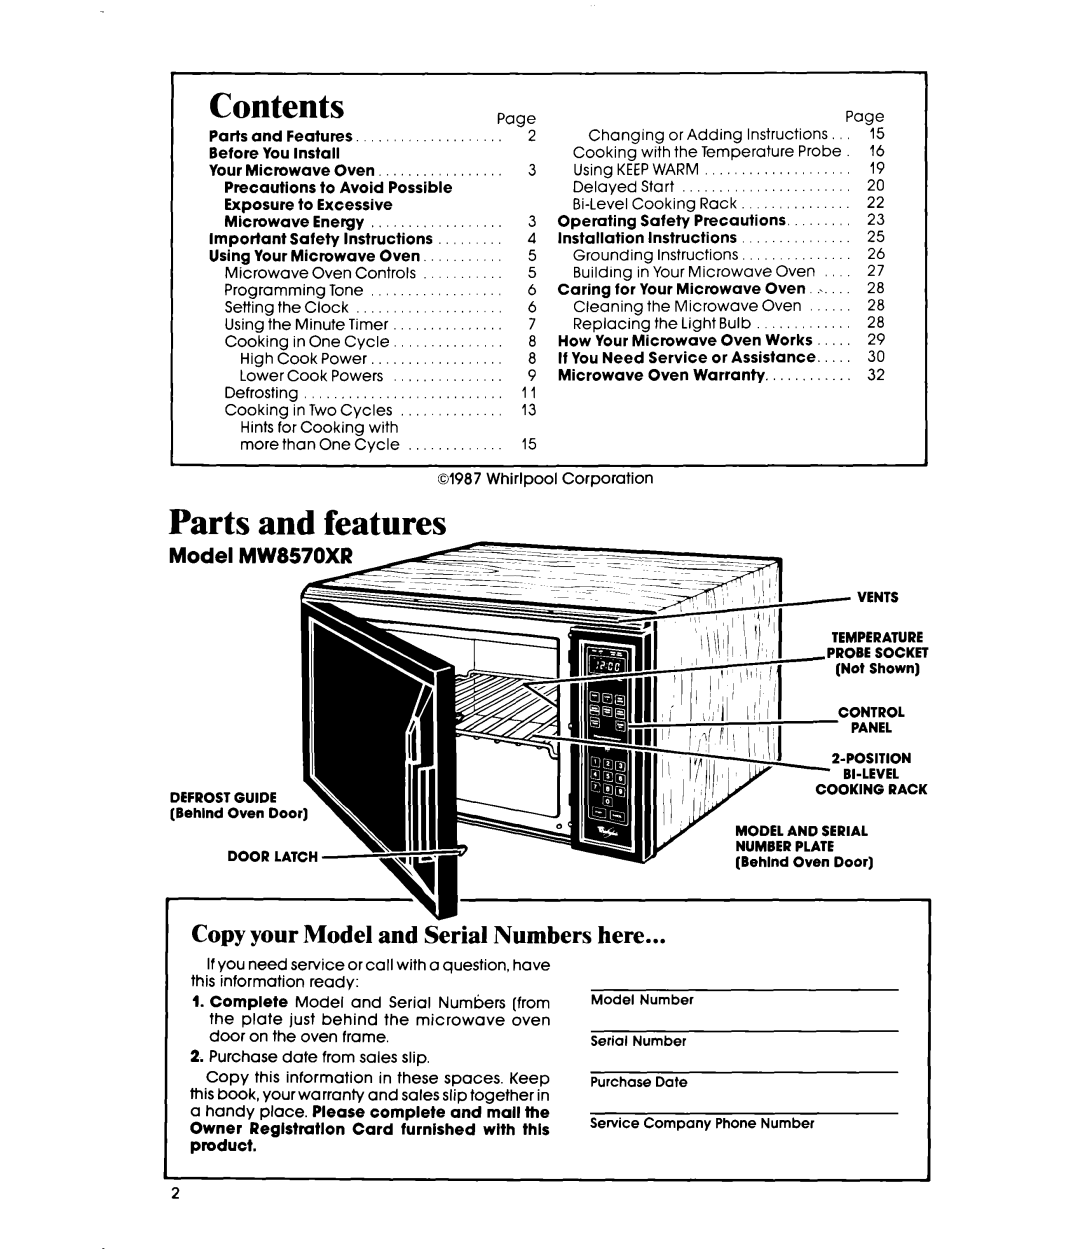 Whirlpool manual Contents, Parts and features, Copy your Model and Serial Numbers here, Model MW8570XR 